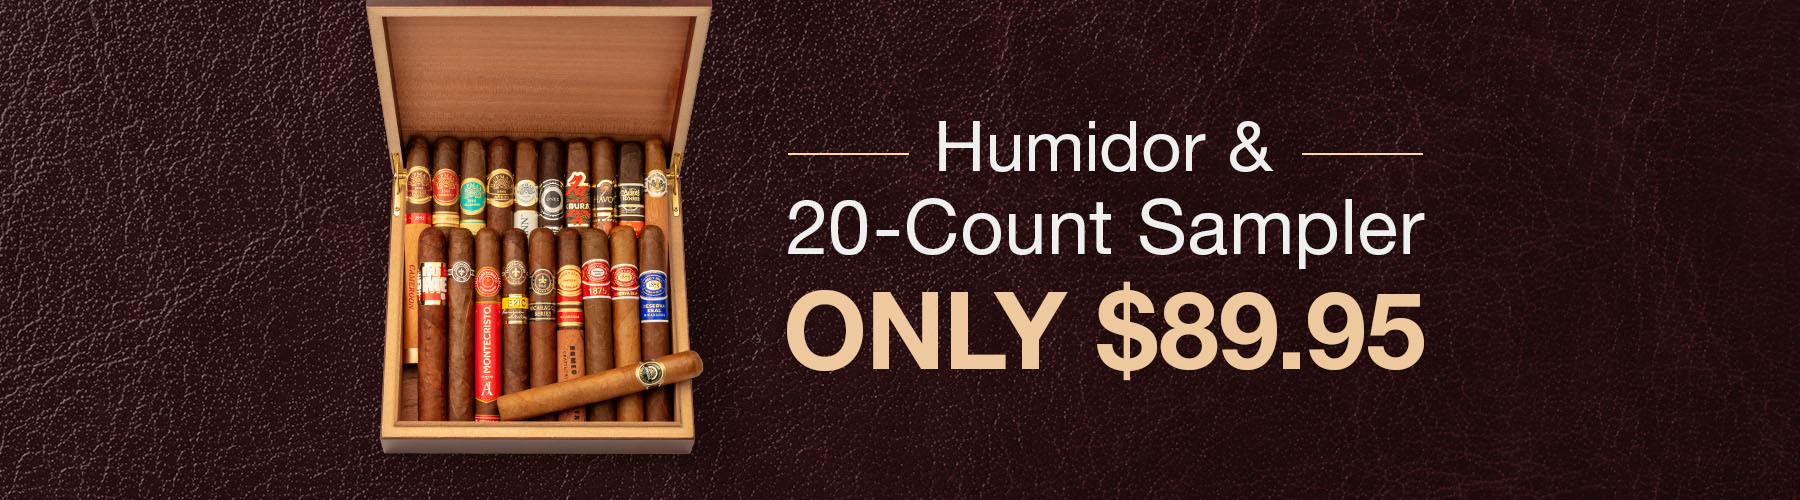 Humidor & 20-Count Sampler Only $89.95!